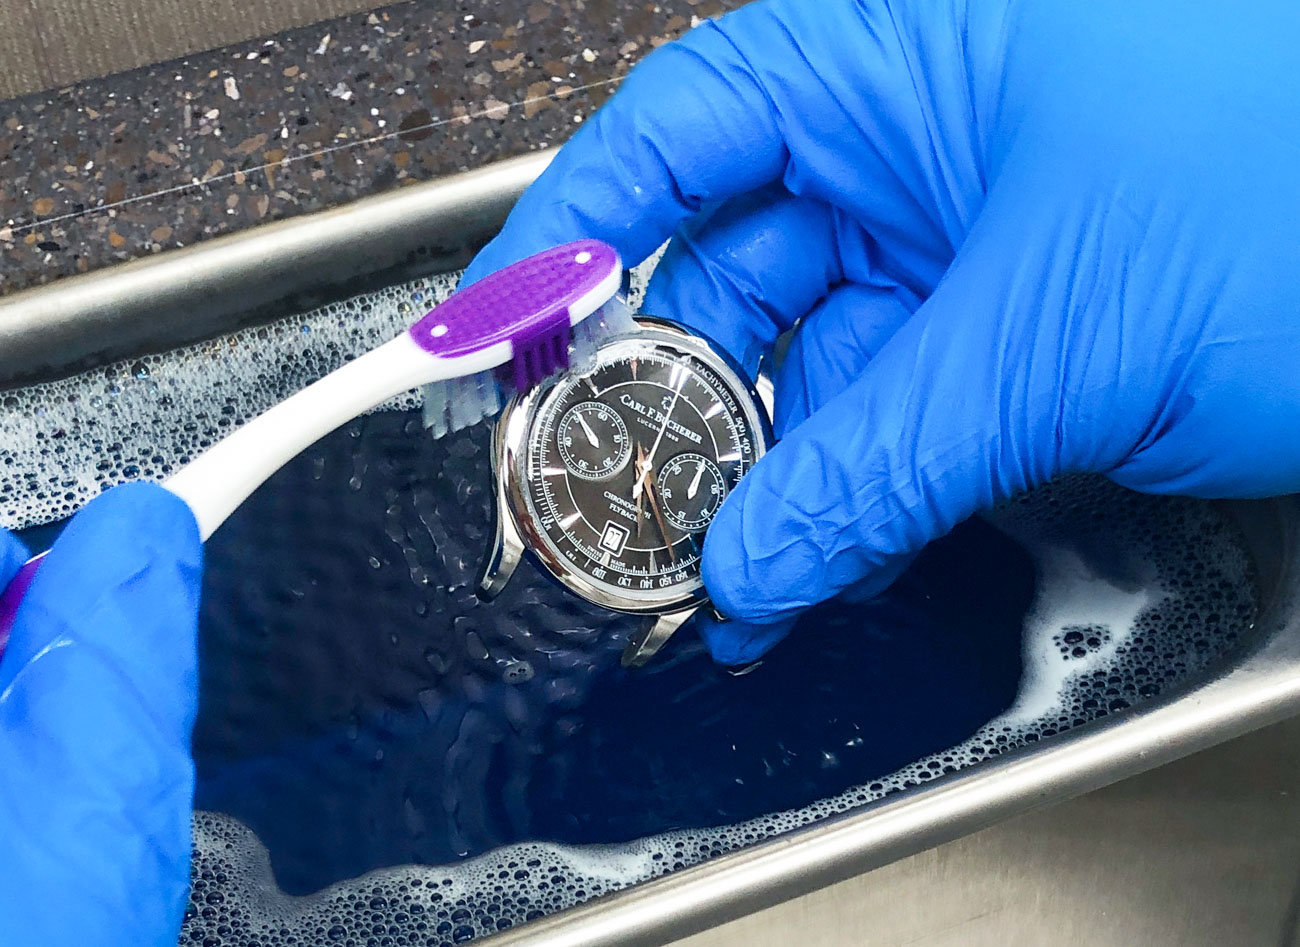 How To Properly Sanitize Your Wrist Watch